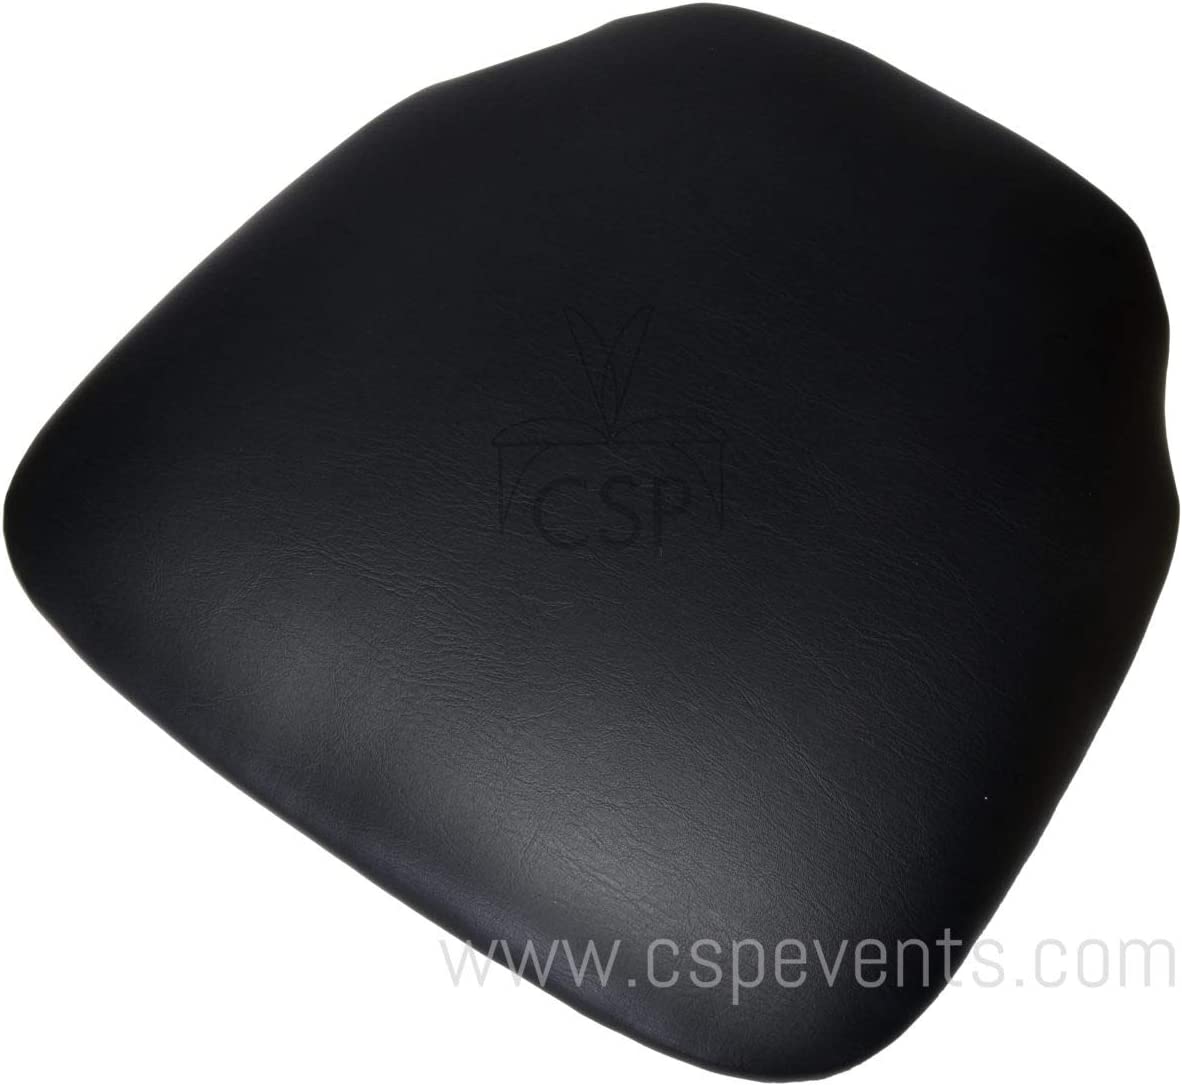 Commercial Seating Products Black Vinyl Cushions Chairs